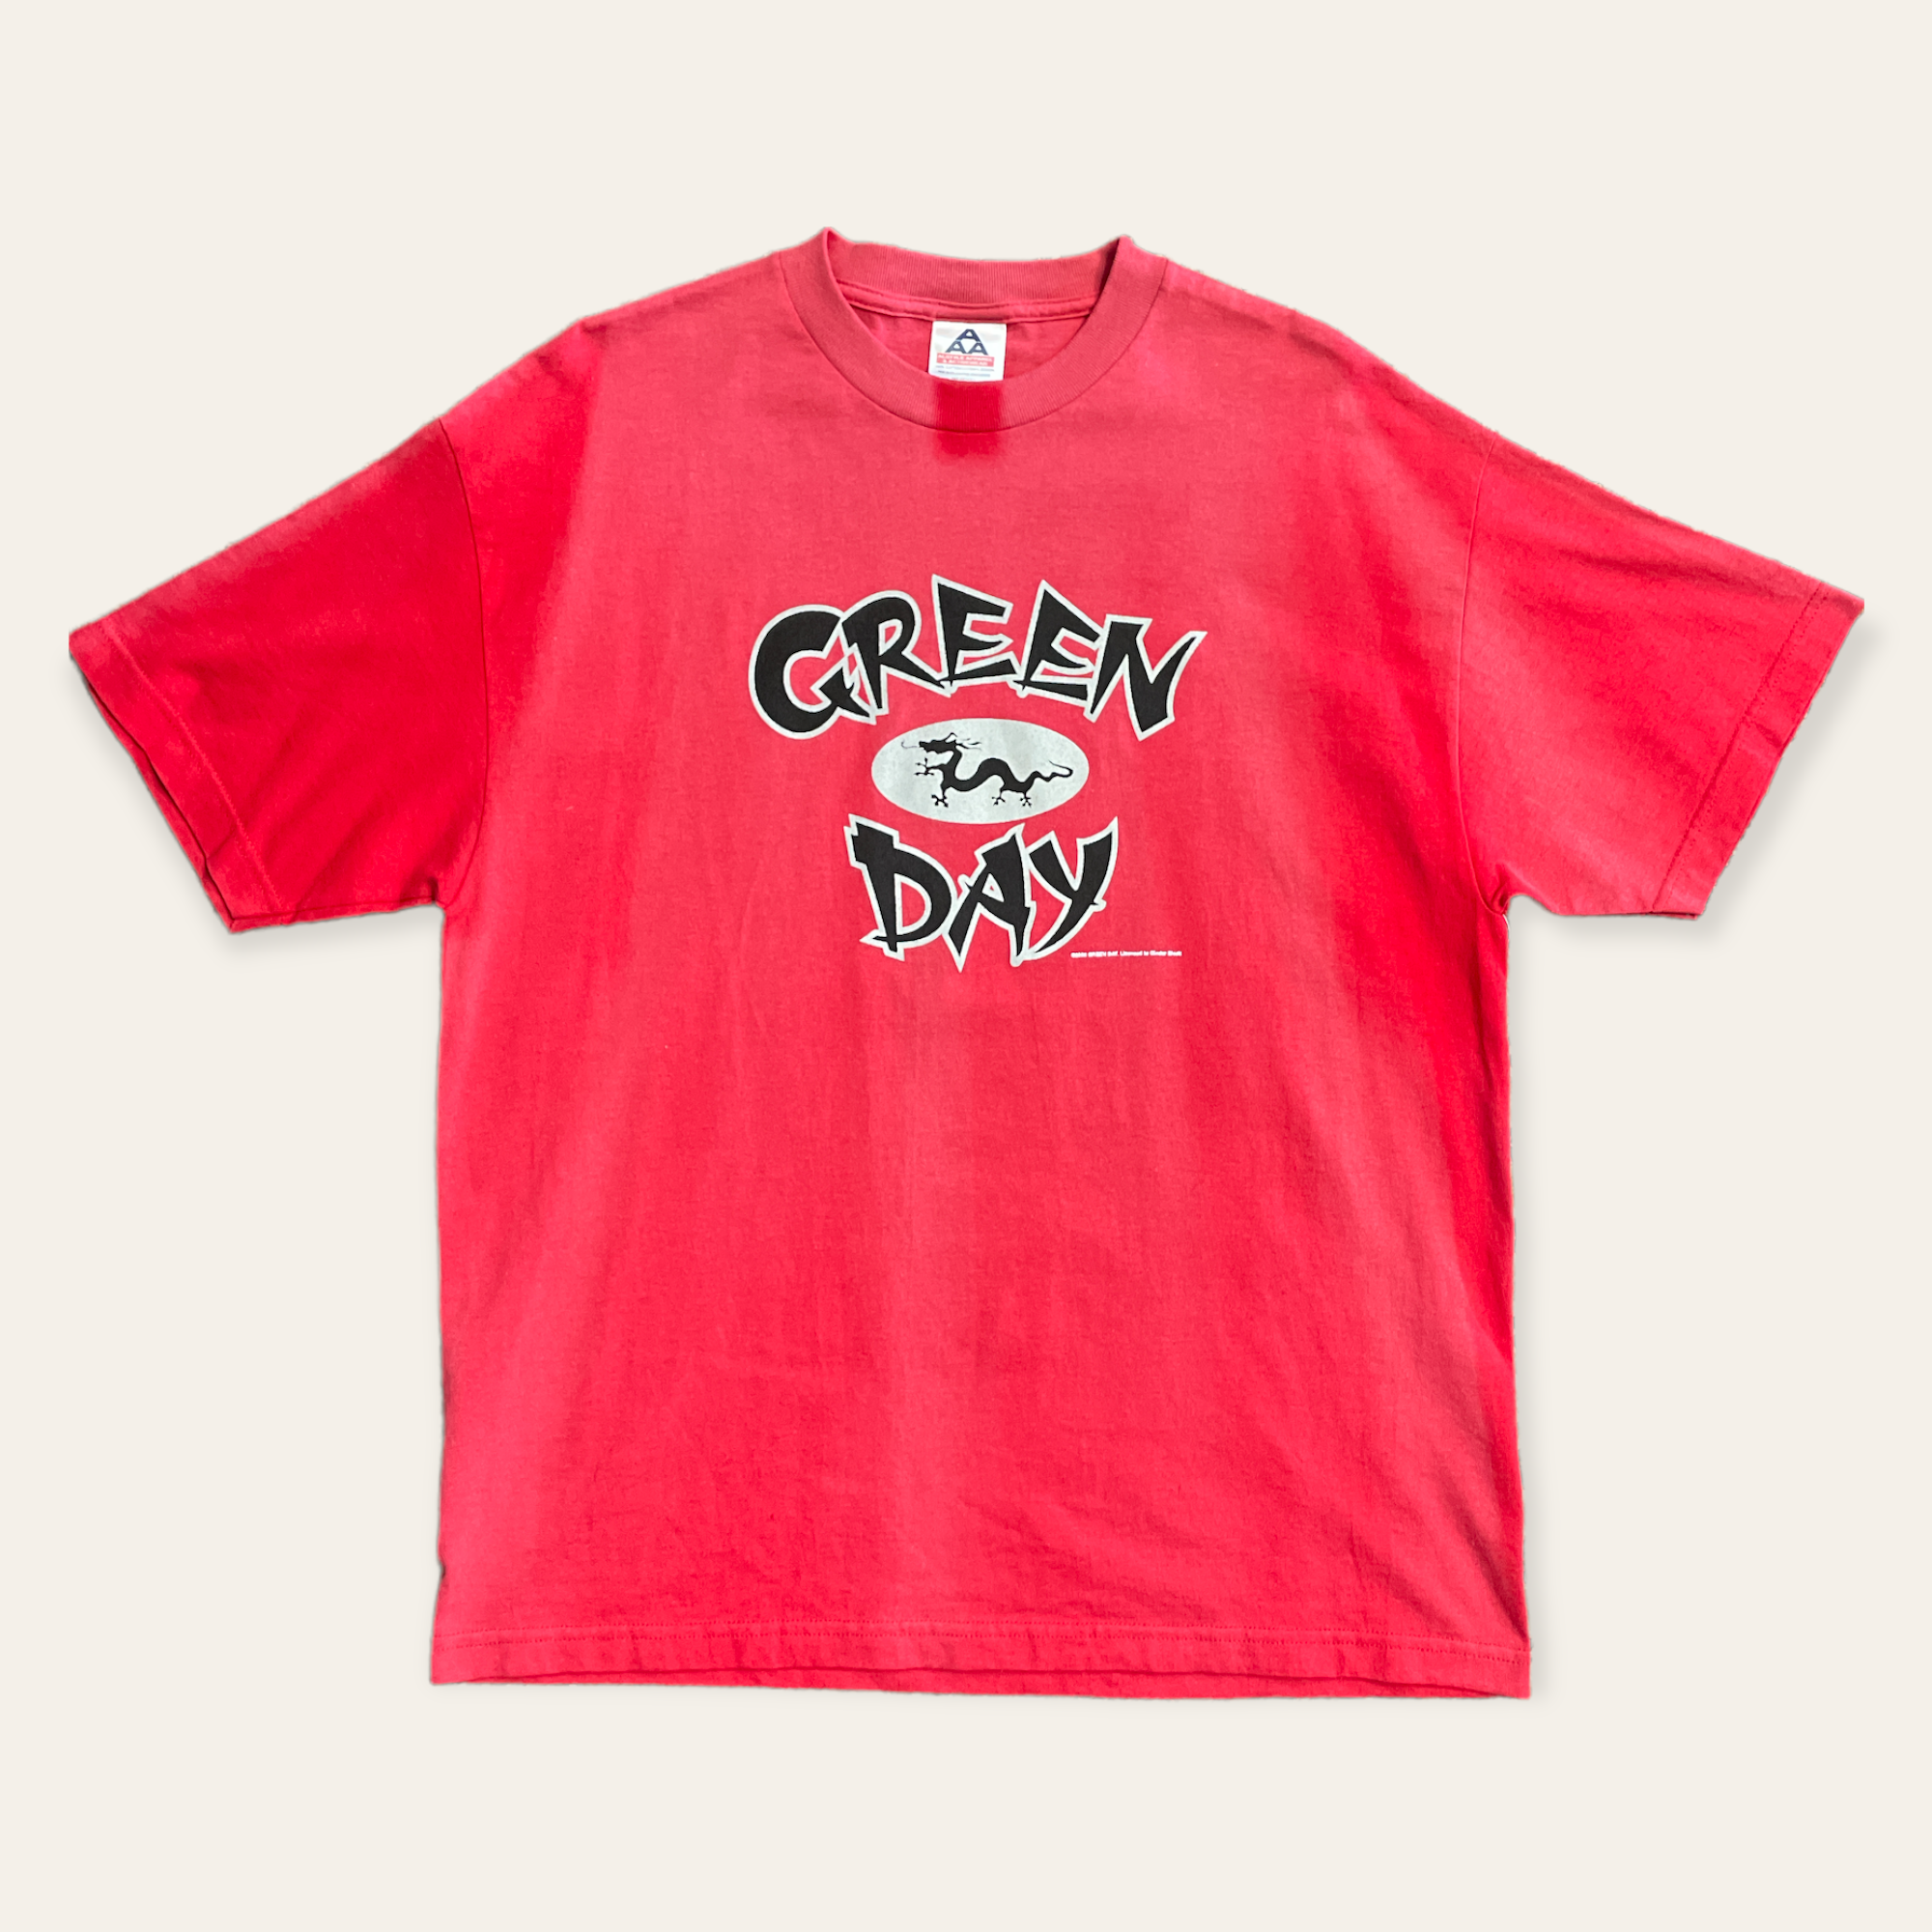 2000 Green Day Tee Size XL